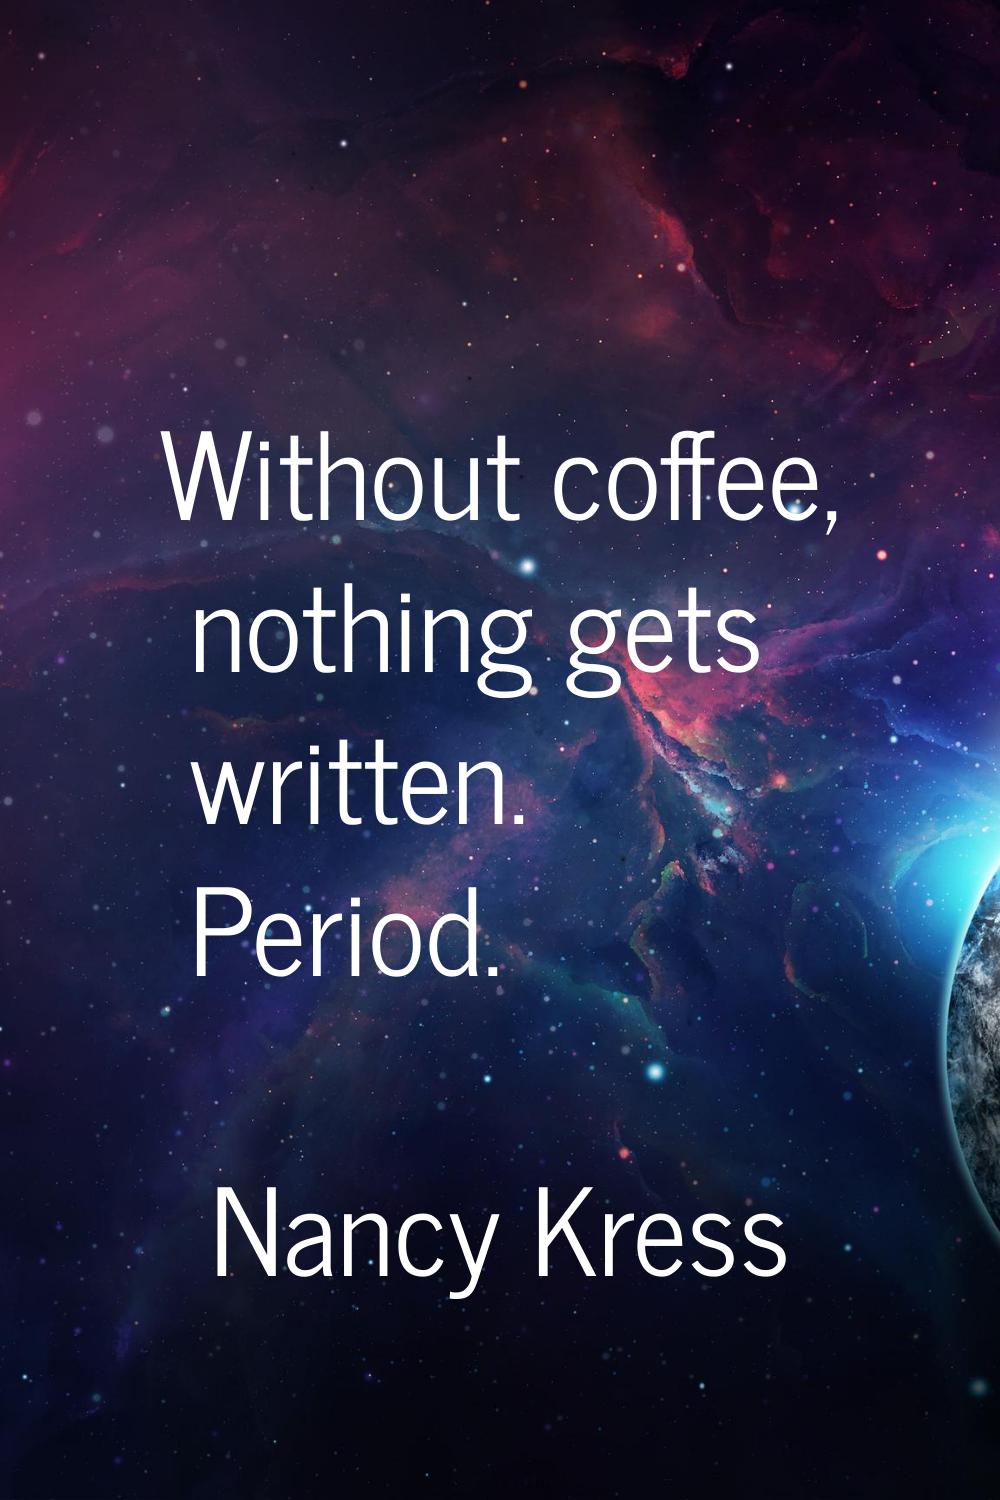 Without coffee, nothing gets written. Period.